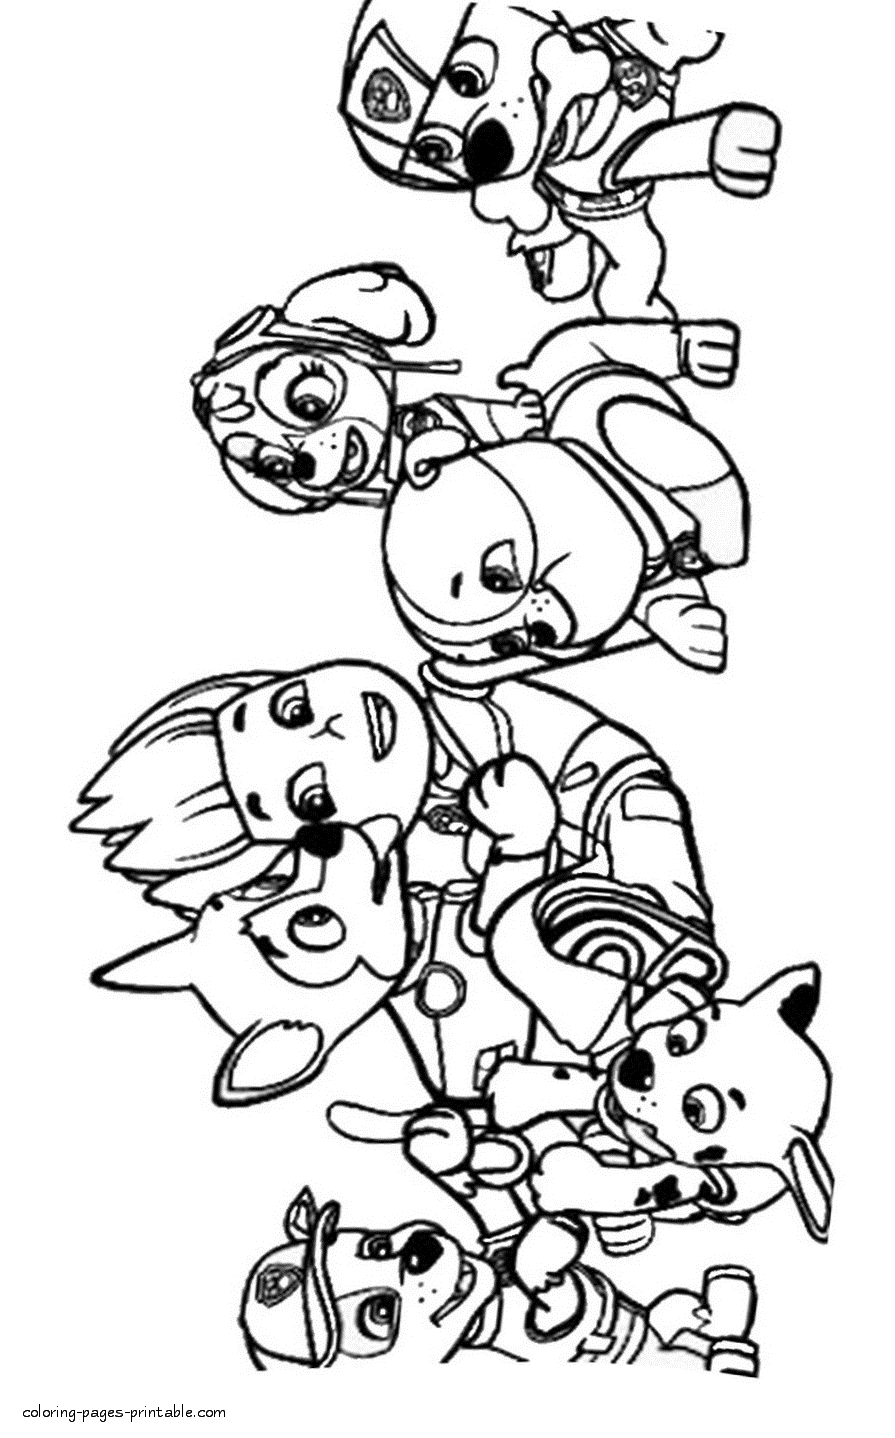 free-paw-patrol-coloring-pages-for-little-kids-coloring-pages